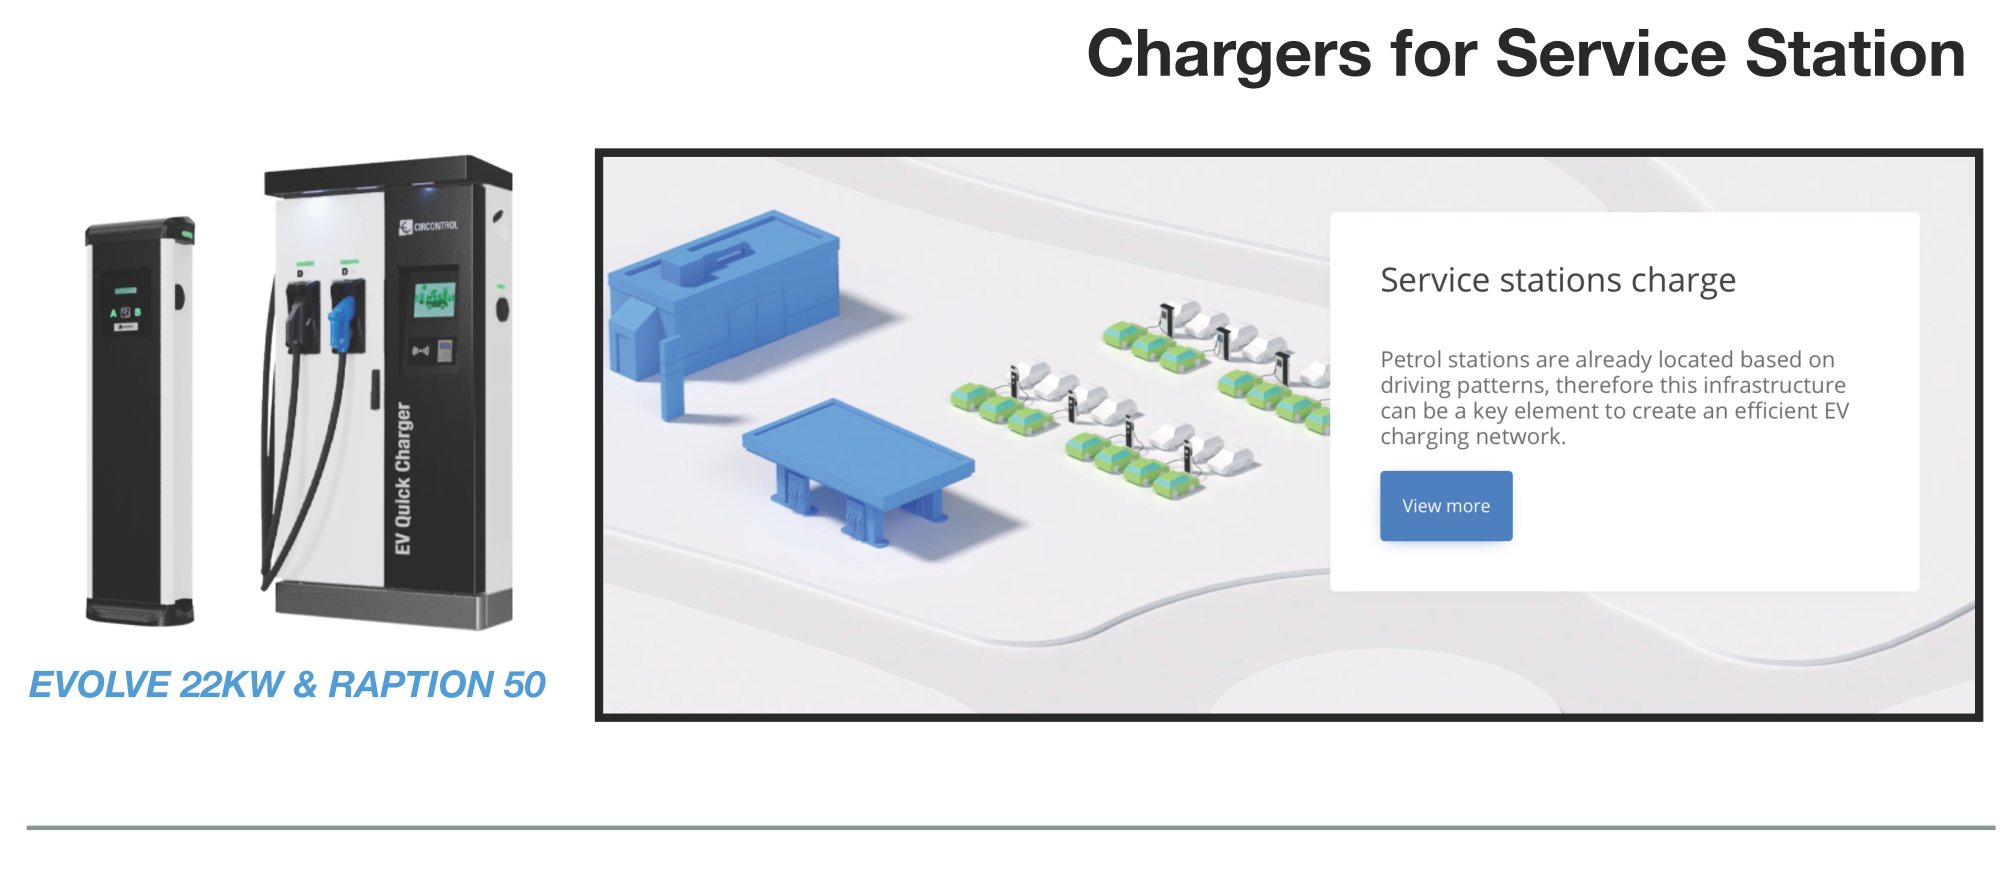 Chargers for service station